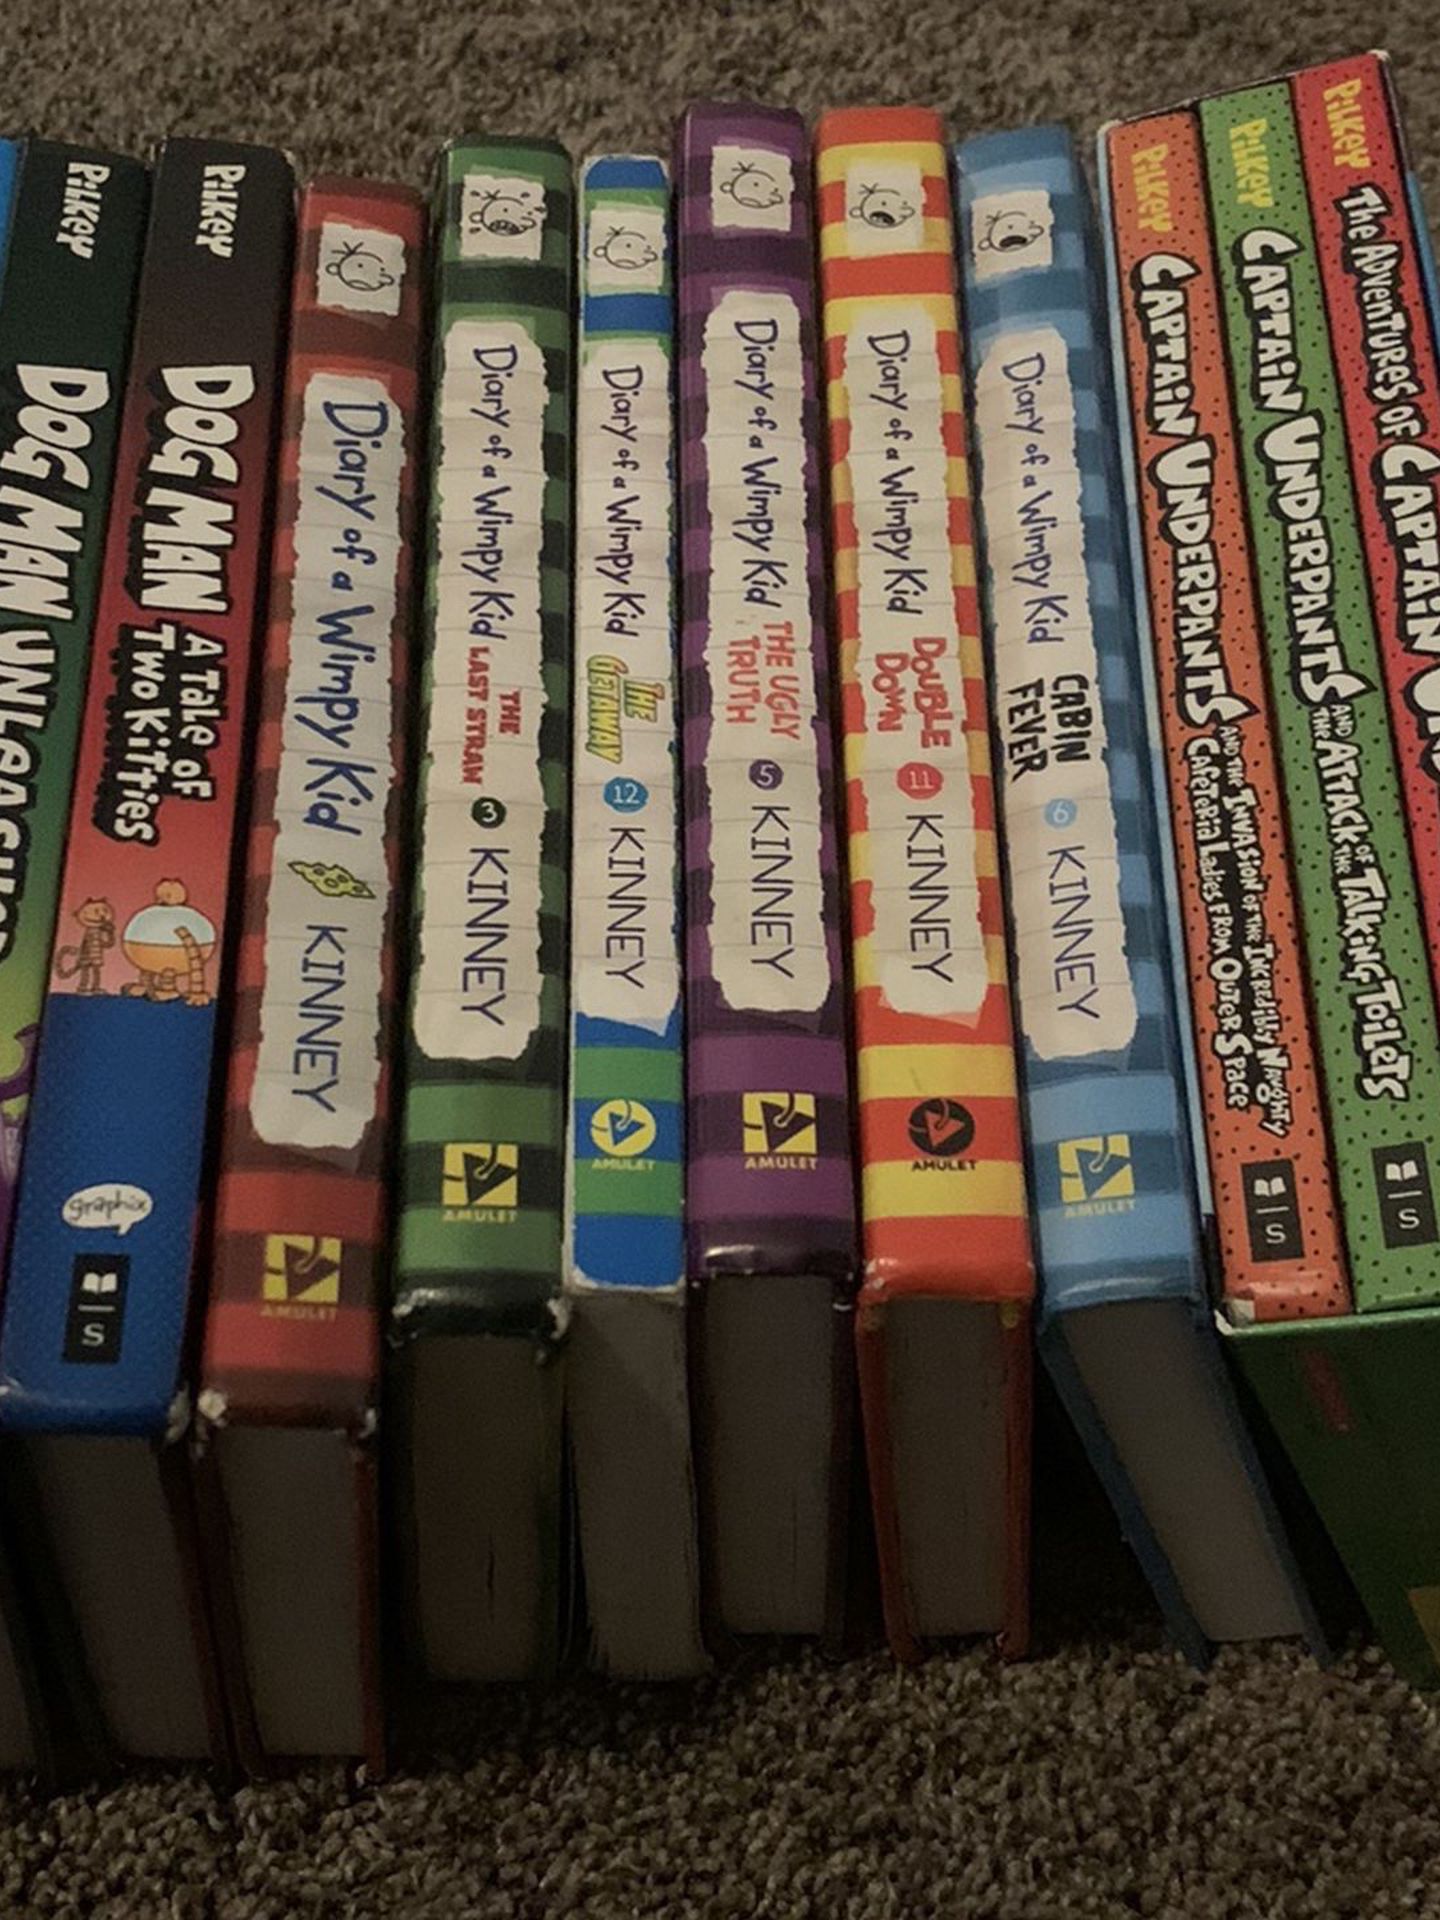 Diary of Wimpy Kid, DogMan, Captain Underpants Books